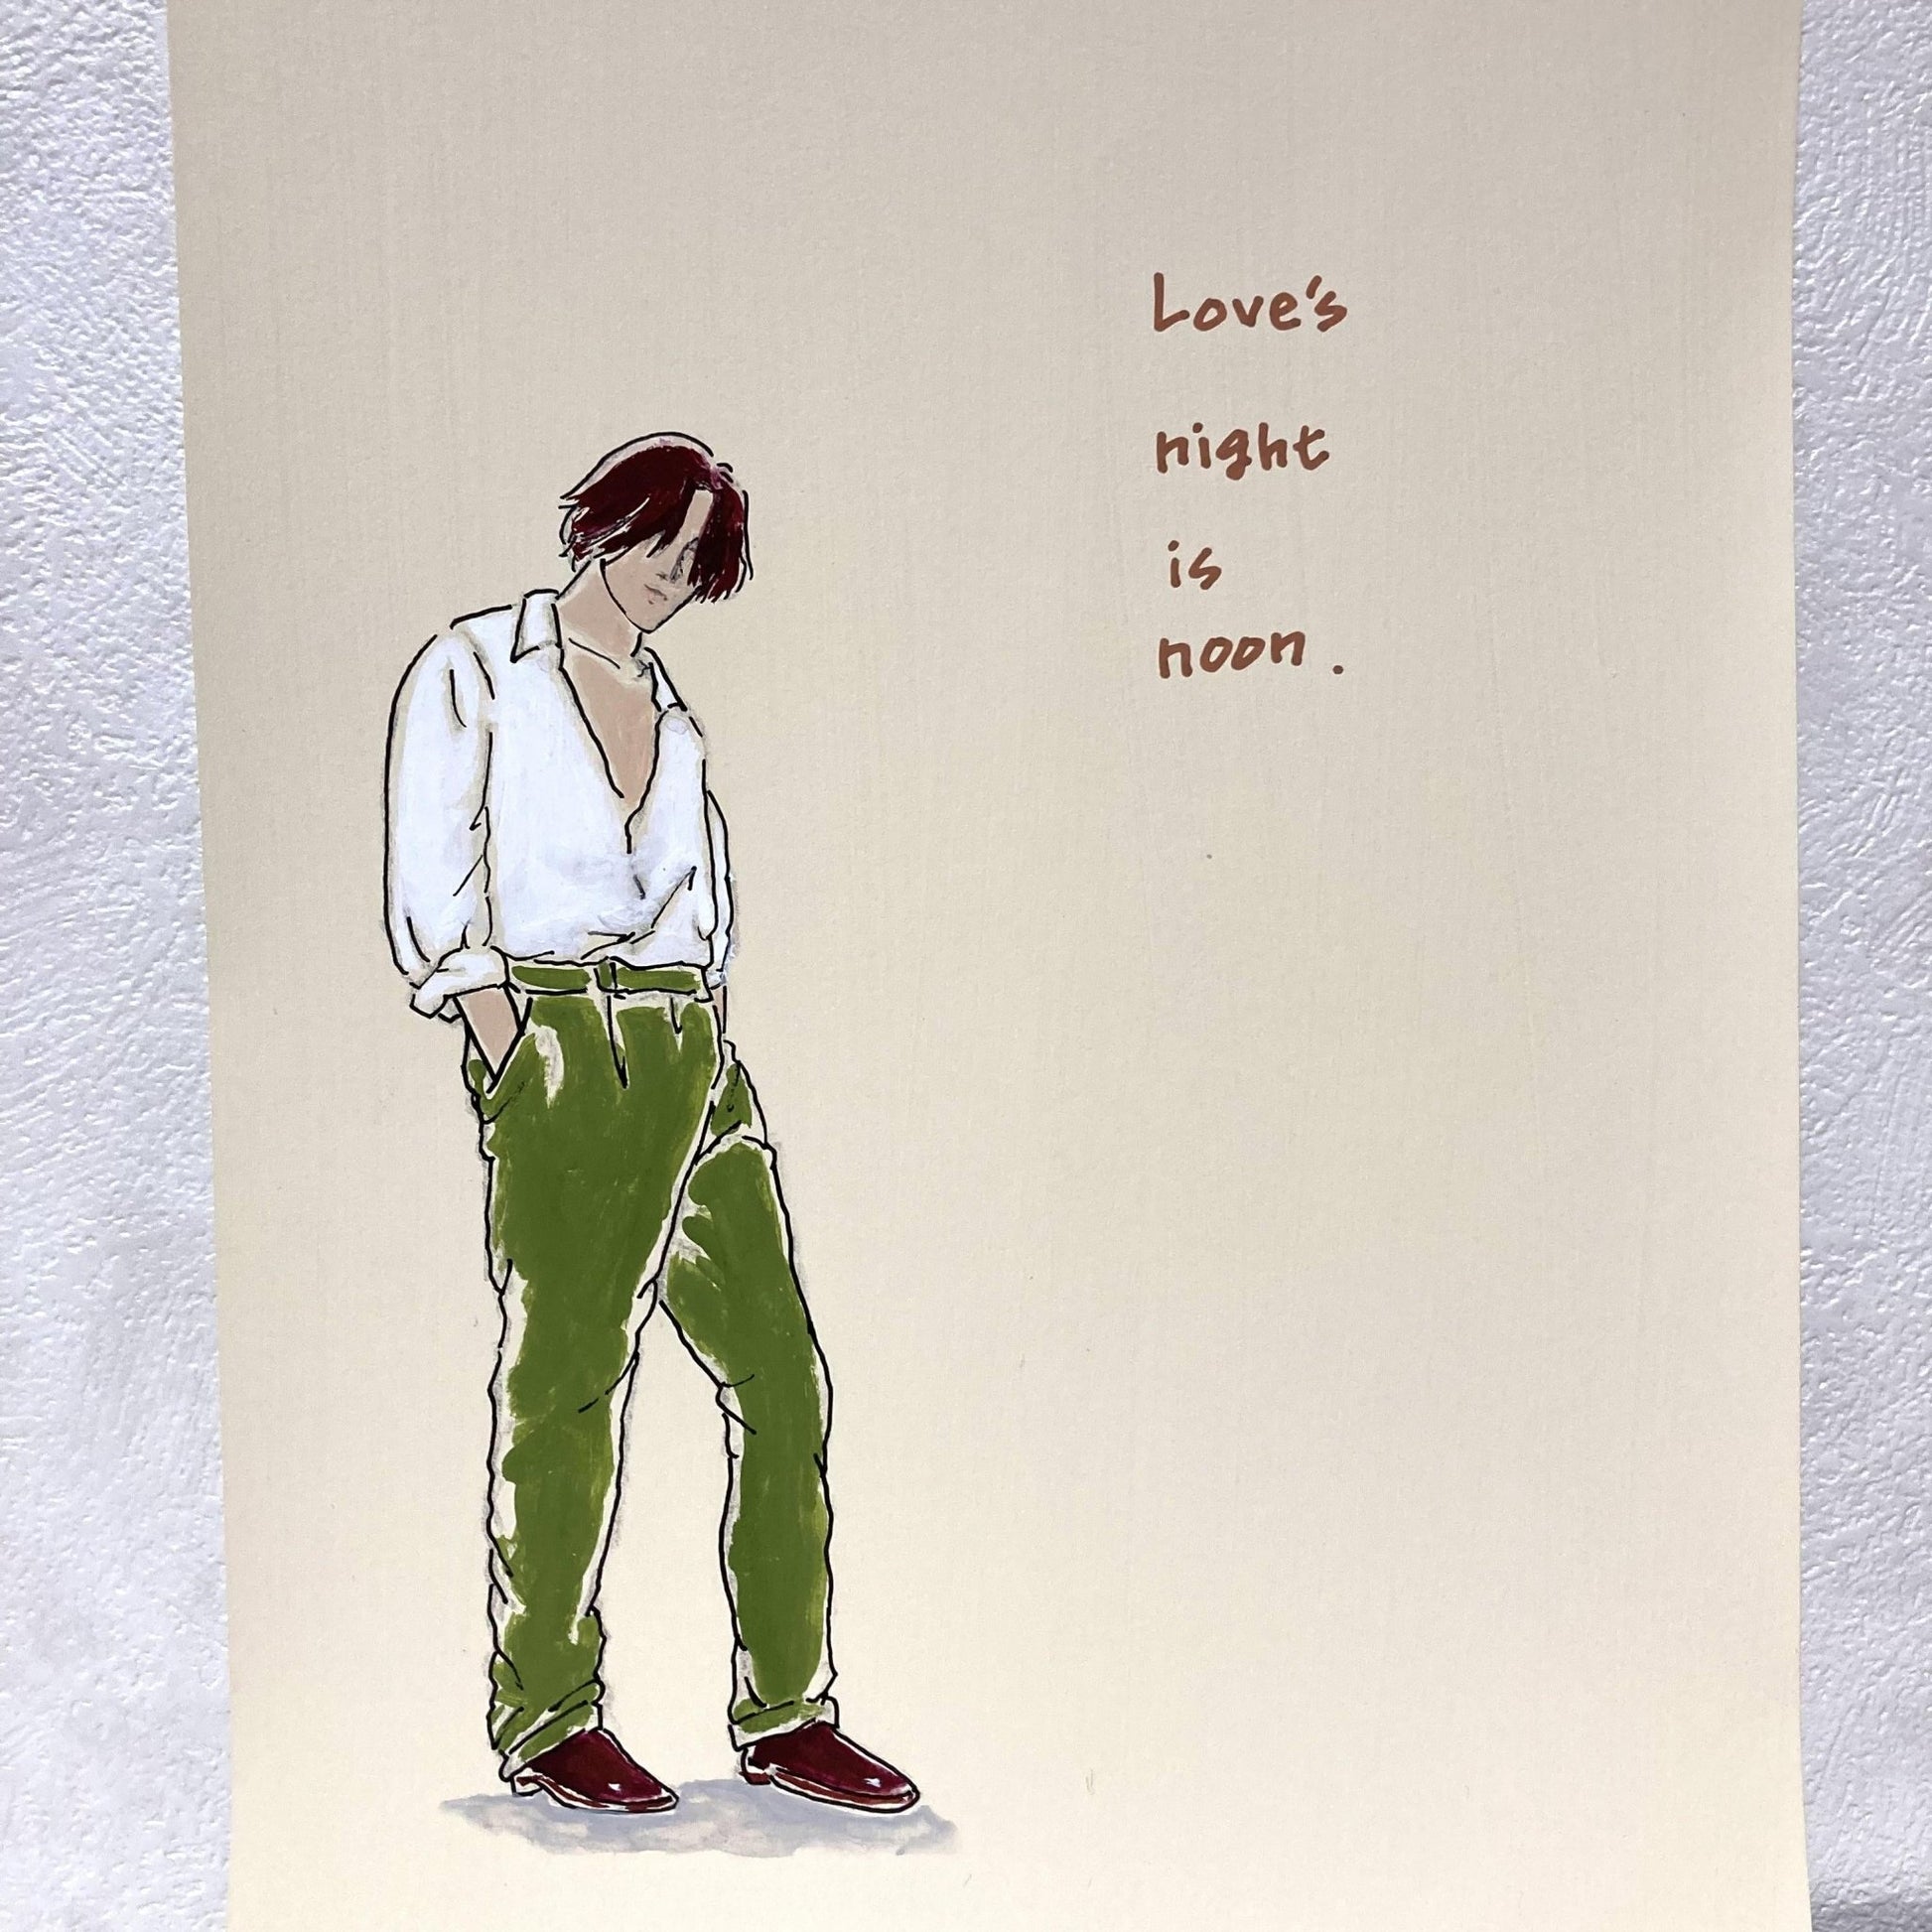 Love's night is noon. - FROM ARTIST